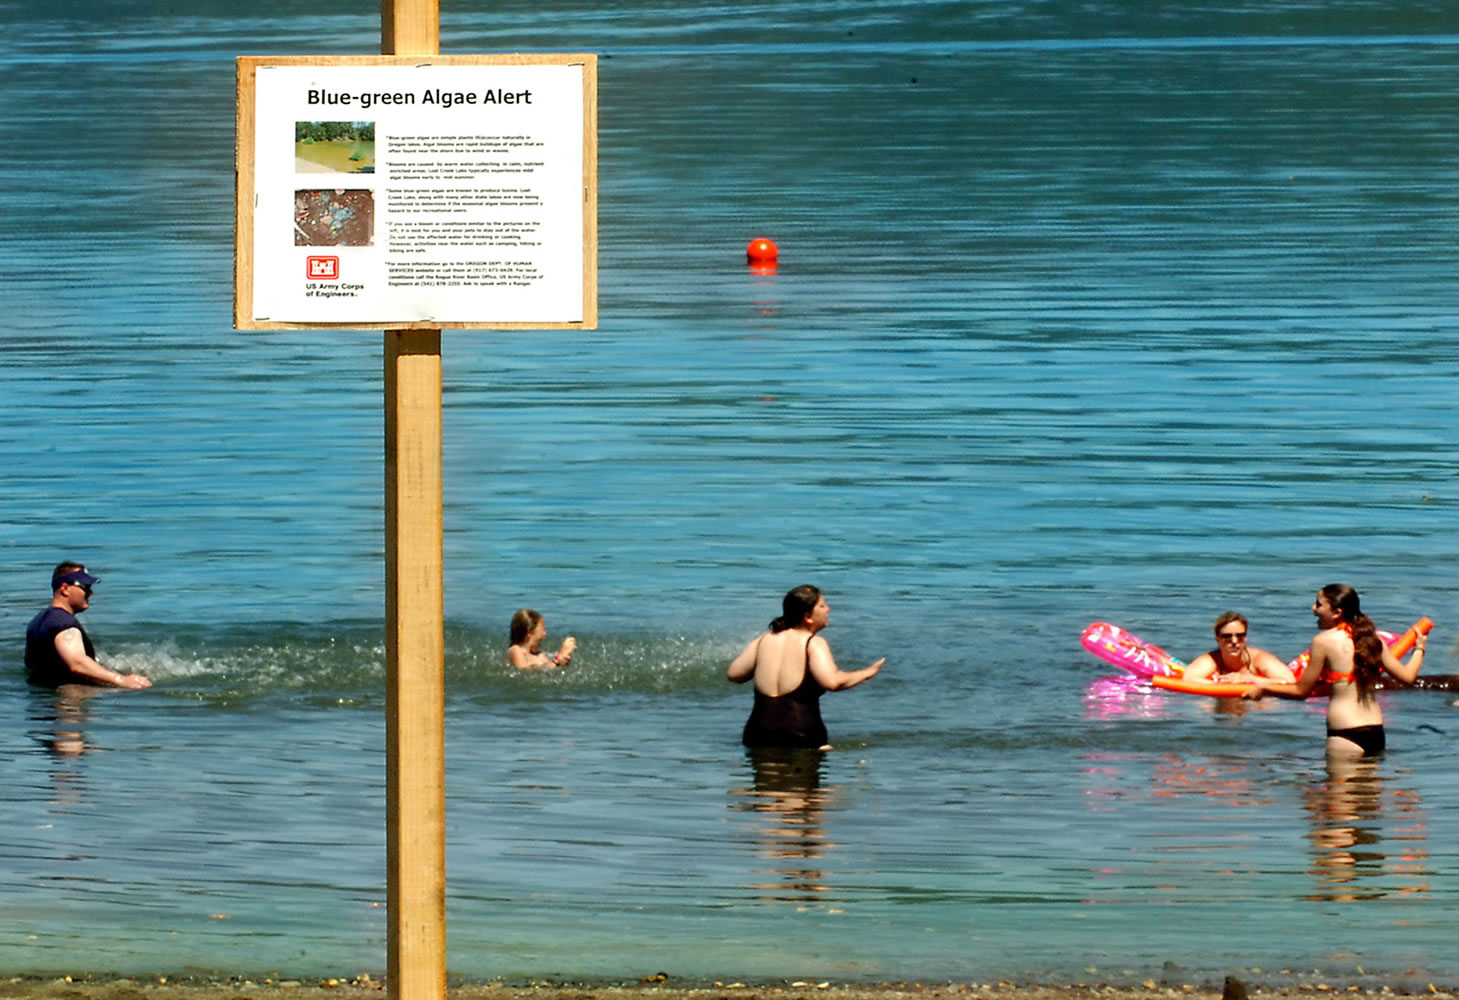 People swim in Lost Creek Lake near Shady Cove, Ore., despite a sign warning of a threat to their health from toxic algae in the water.